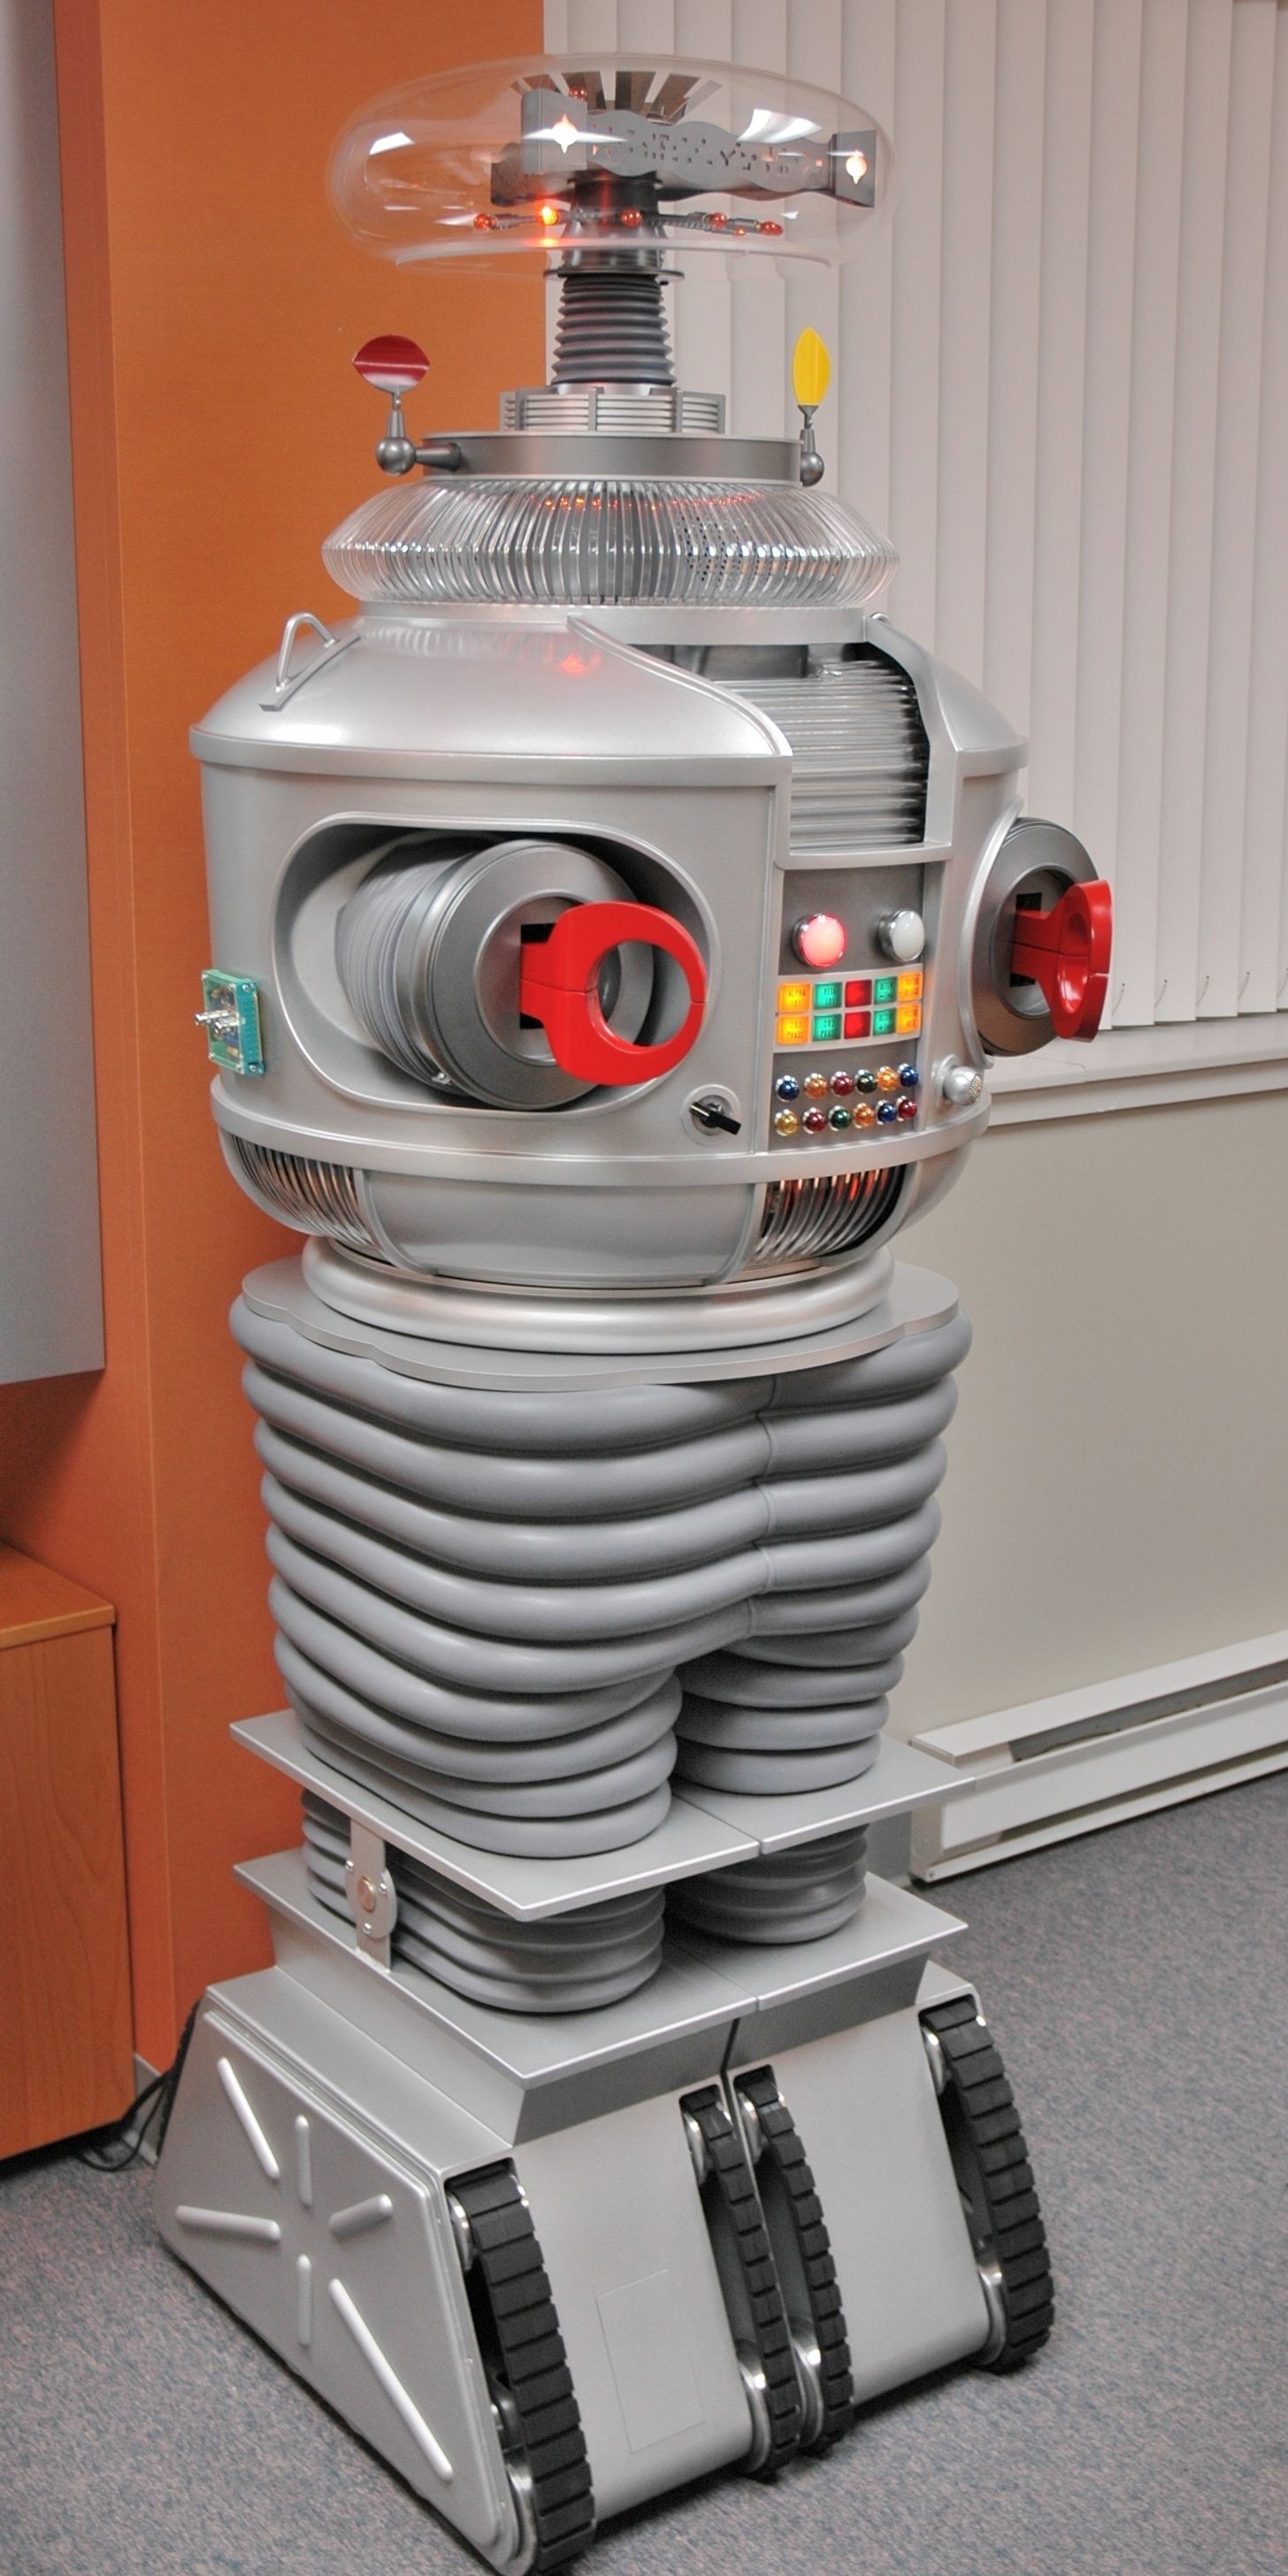 My replica B9 robot shown displayed in my office at PROPOLOGY see more at